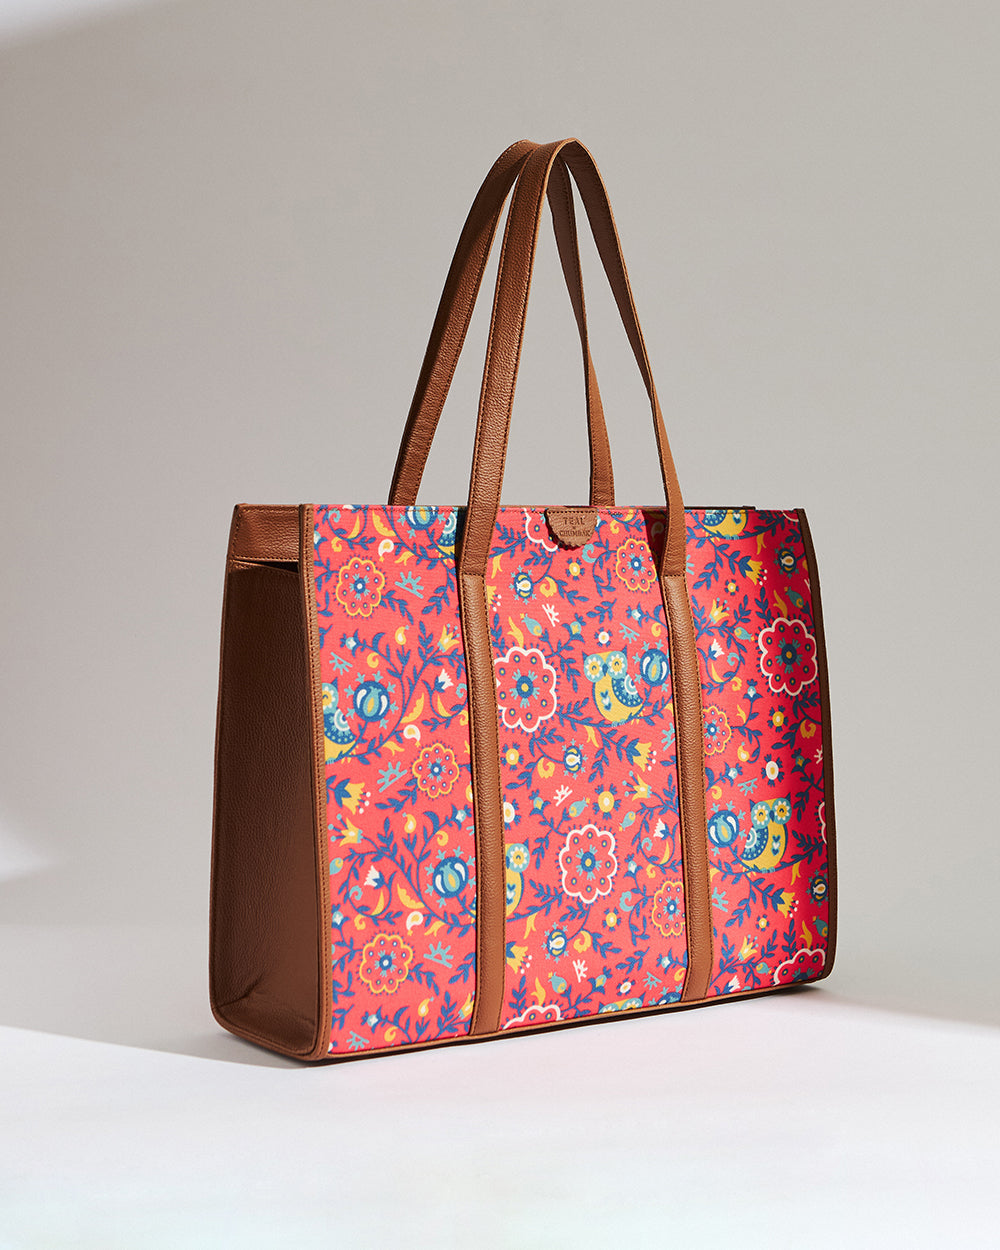 Teal by Chumbak Bukhara Blooms Canvas Tote